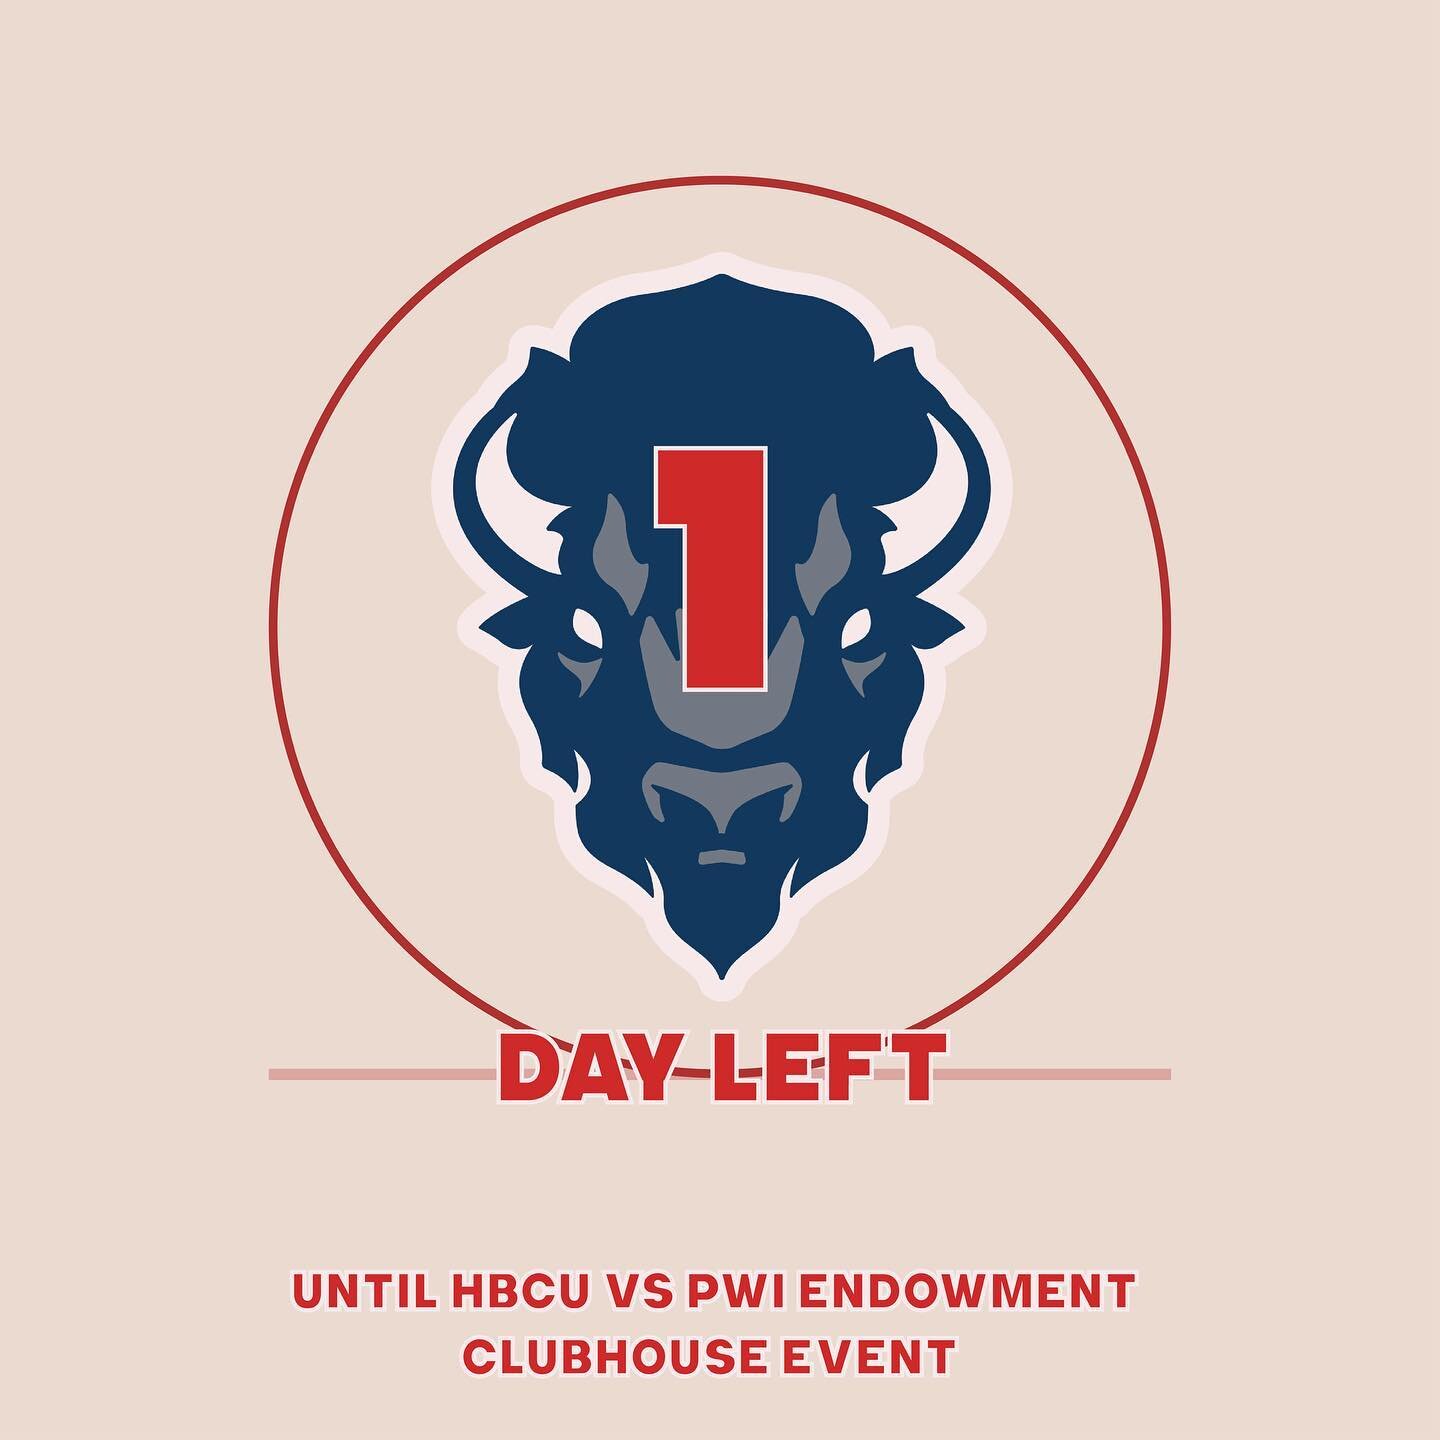 We&rsquo;re one day away HU14 fam ❤️💙:

-Join the We Are Sports event to find out where the money resides on Clubhouse, Saturday Feb.6th at 4pm EST. Head to the link in bio listed &ldquo;Join Us on Clubhouse&rdquo; and add (+) a reminder to your cal